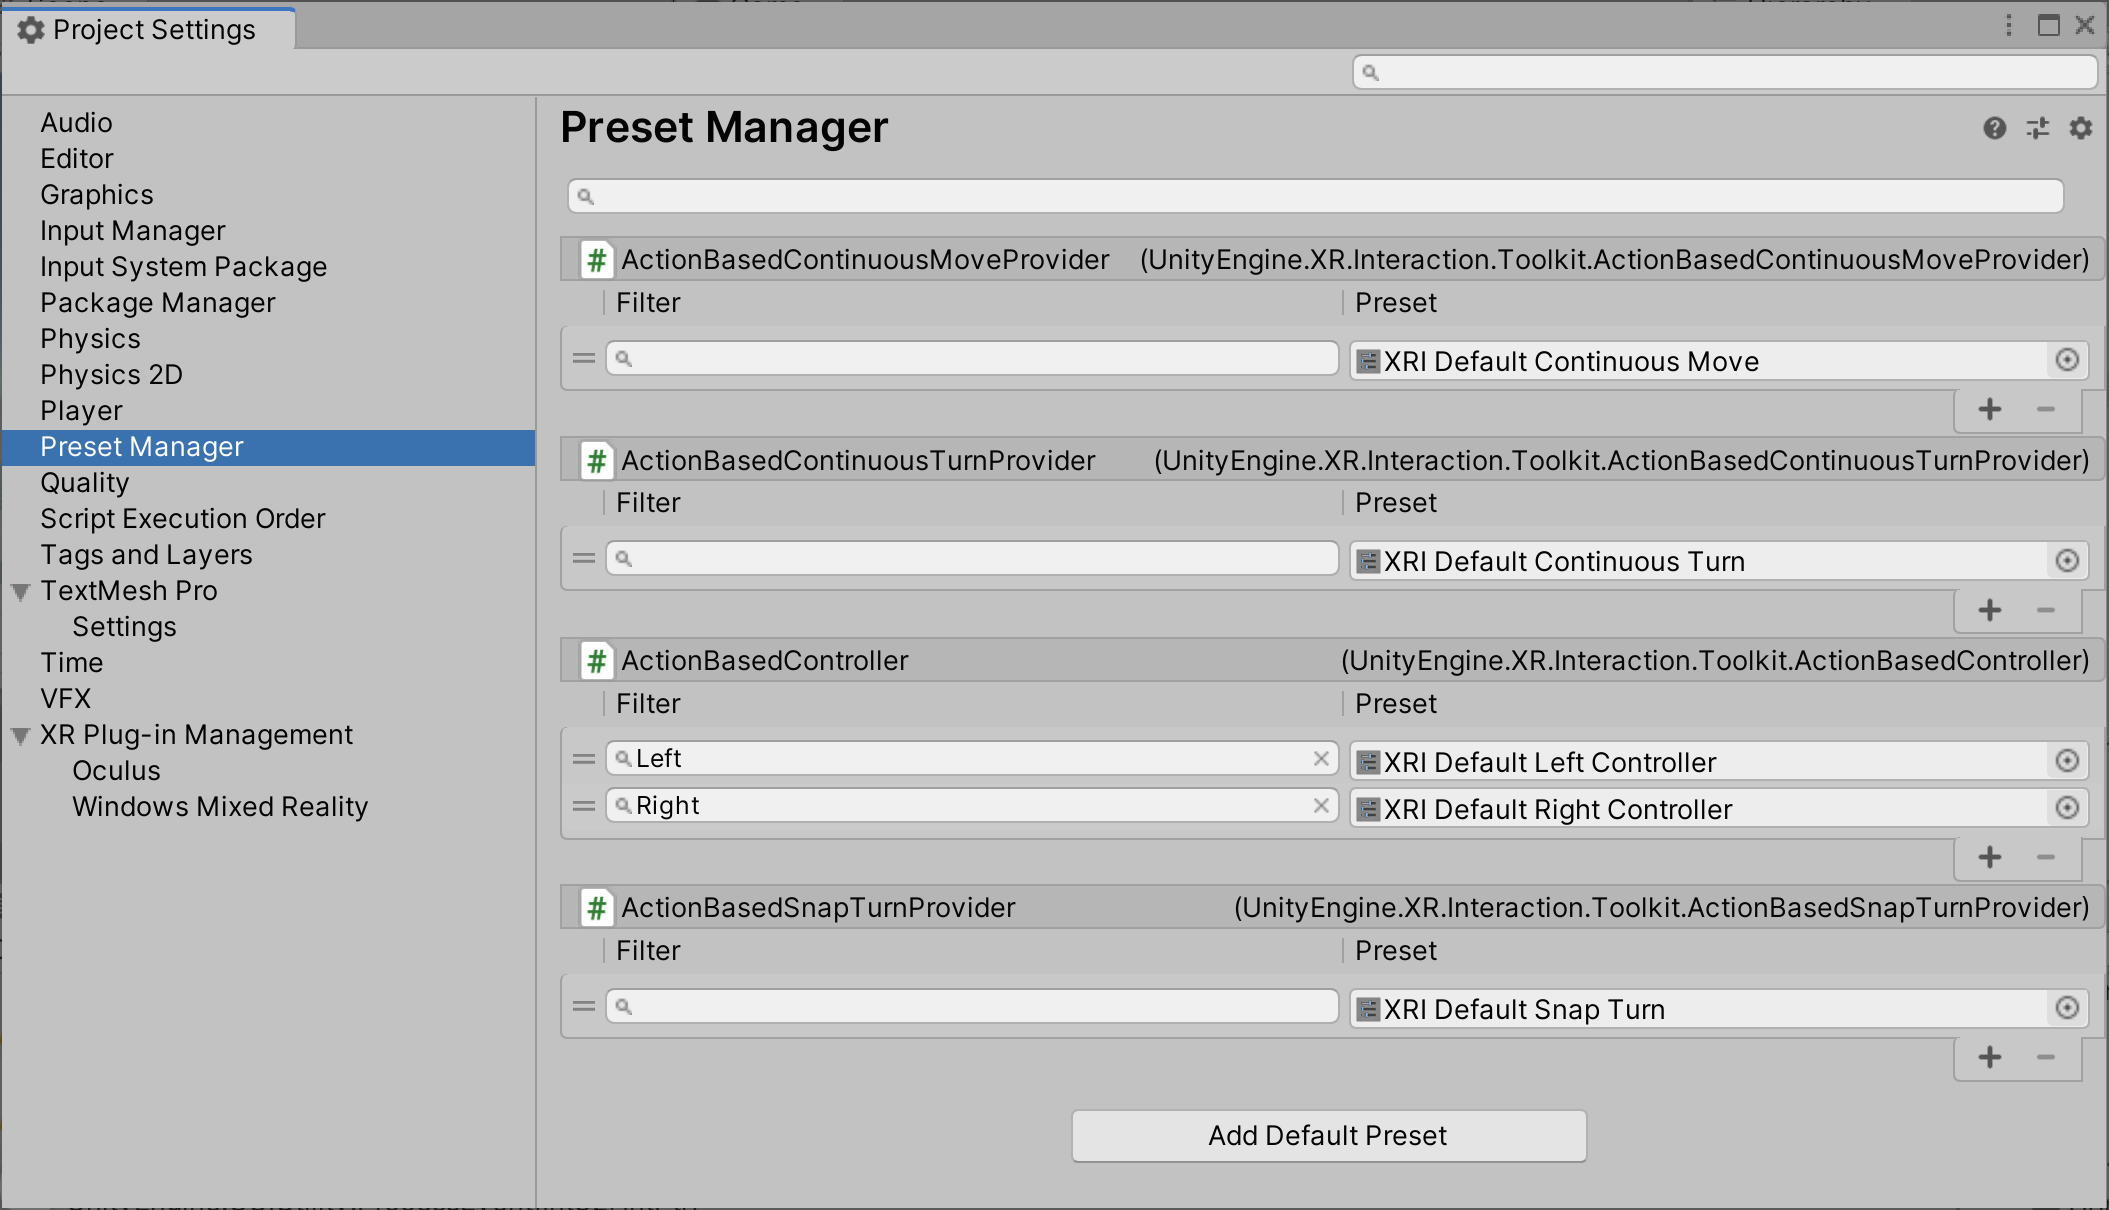 Preset Manager